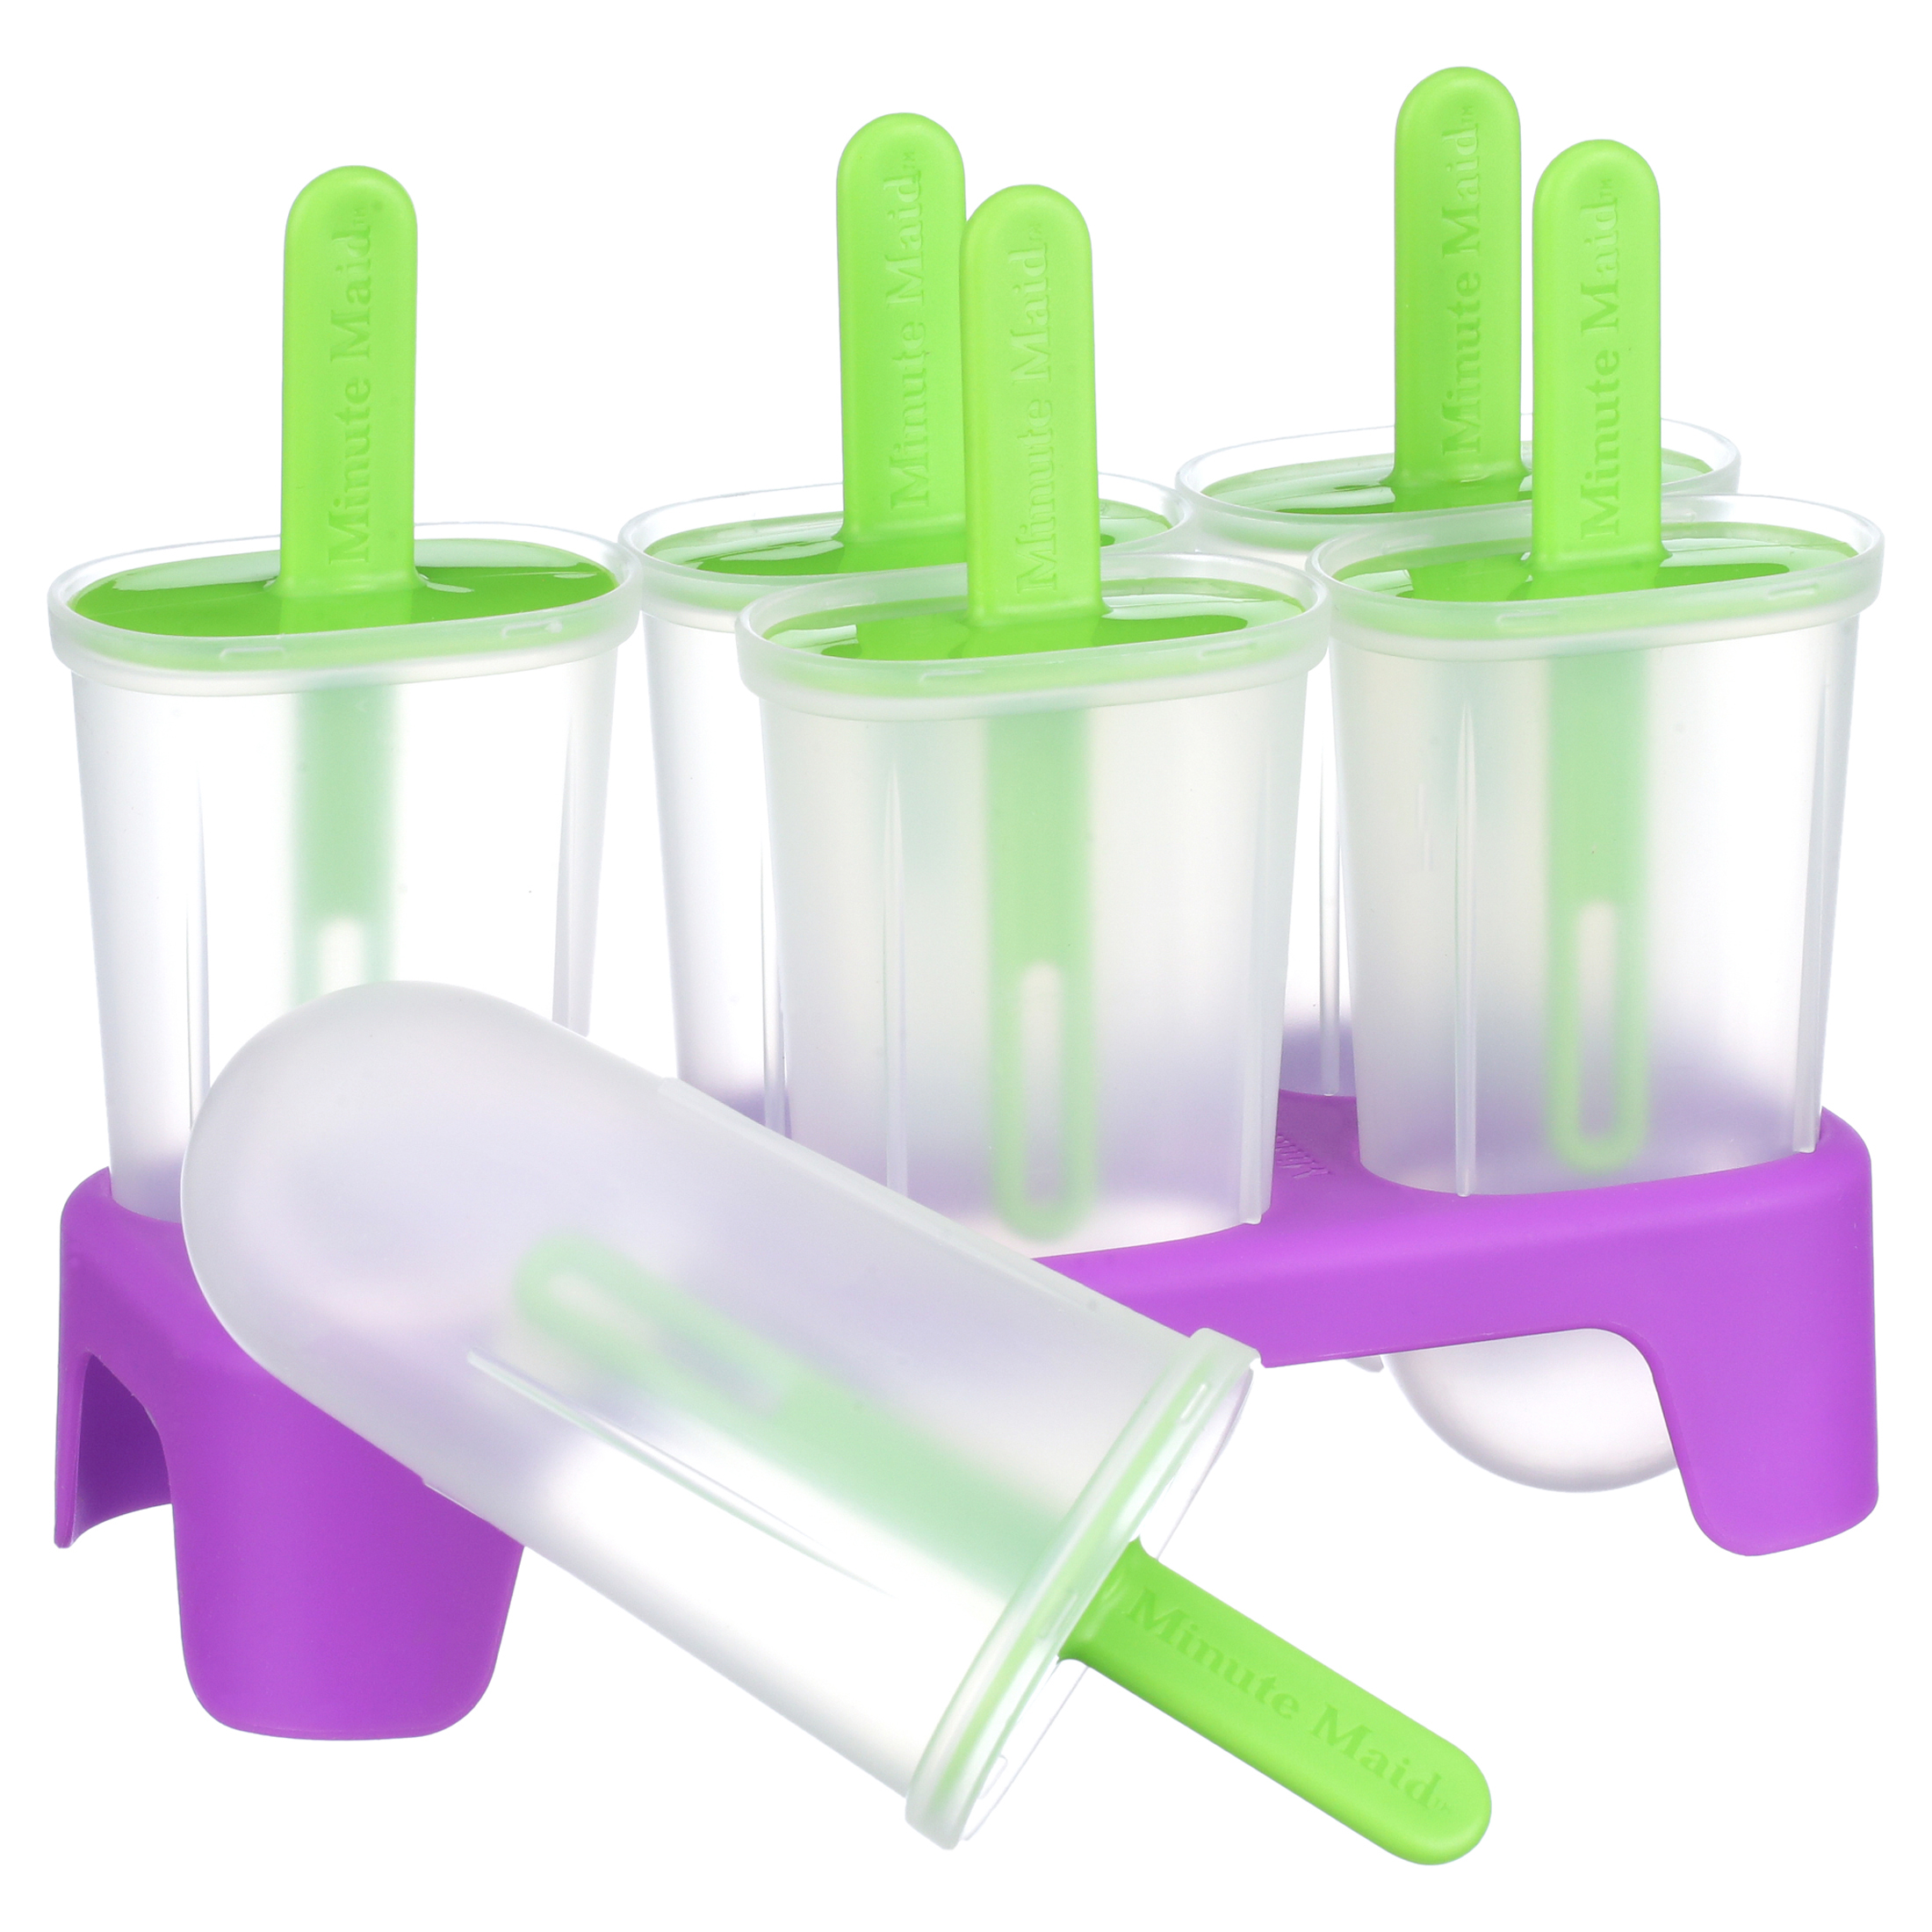 Minute Maid Set of 3 Ice Pop Molds - 1 Red, 1 Teal, 1 Purple - image 5 of 8